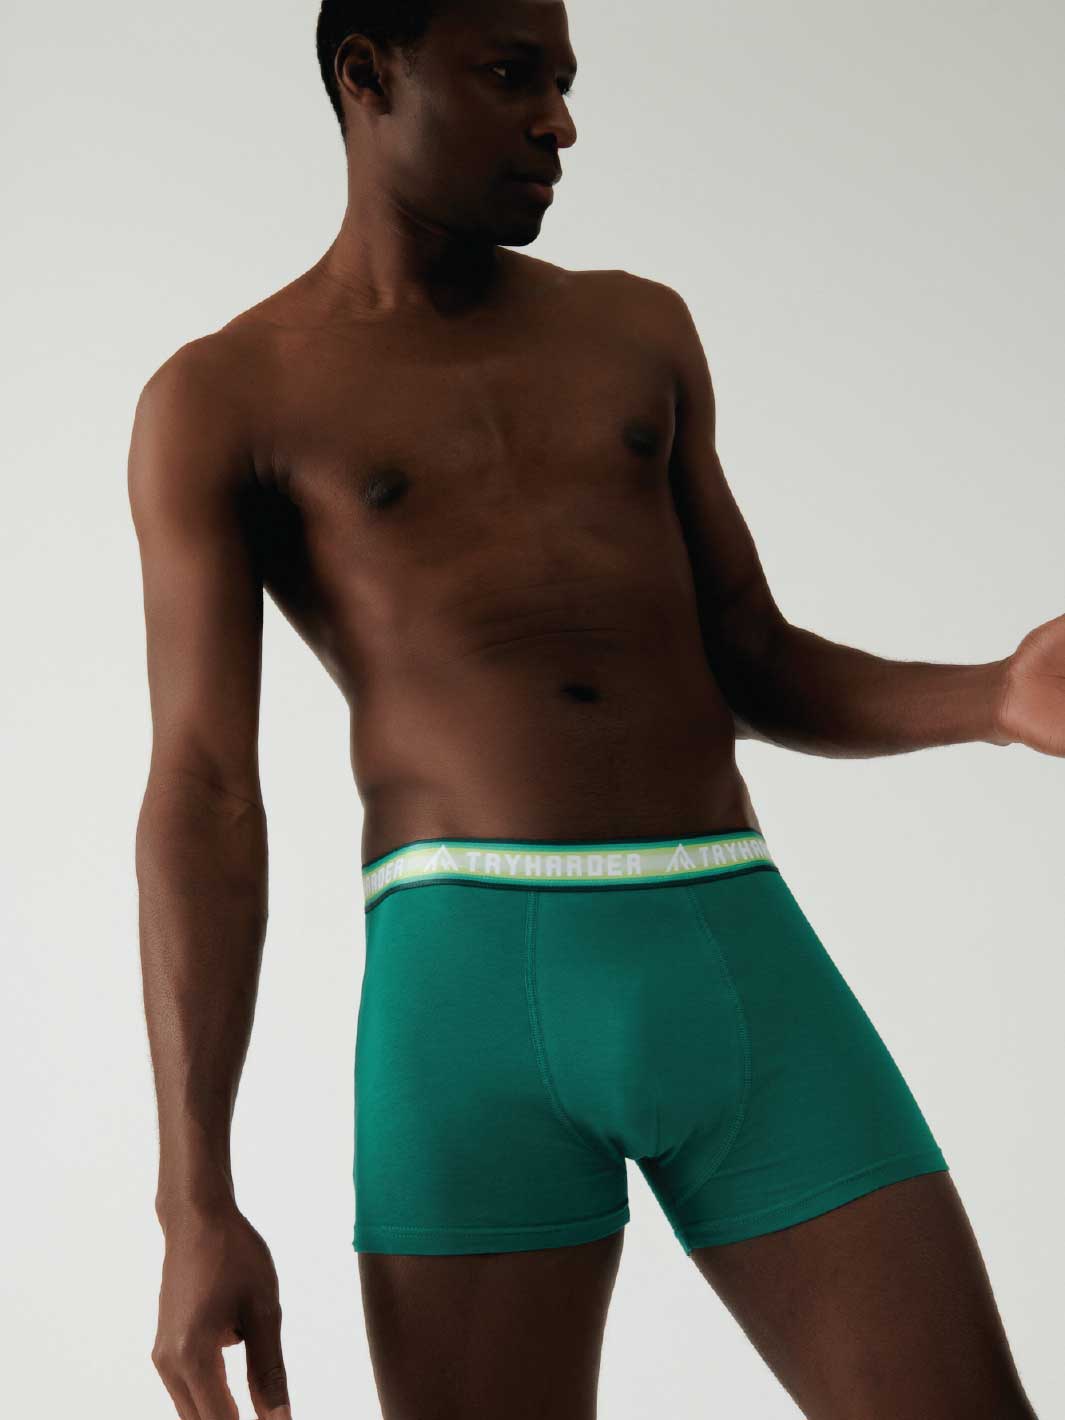 TRYHARDER - Boxer - Green Neon 1 pack